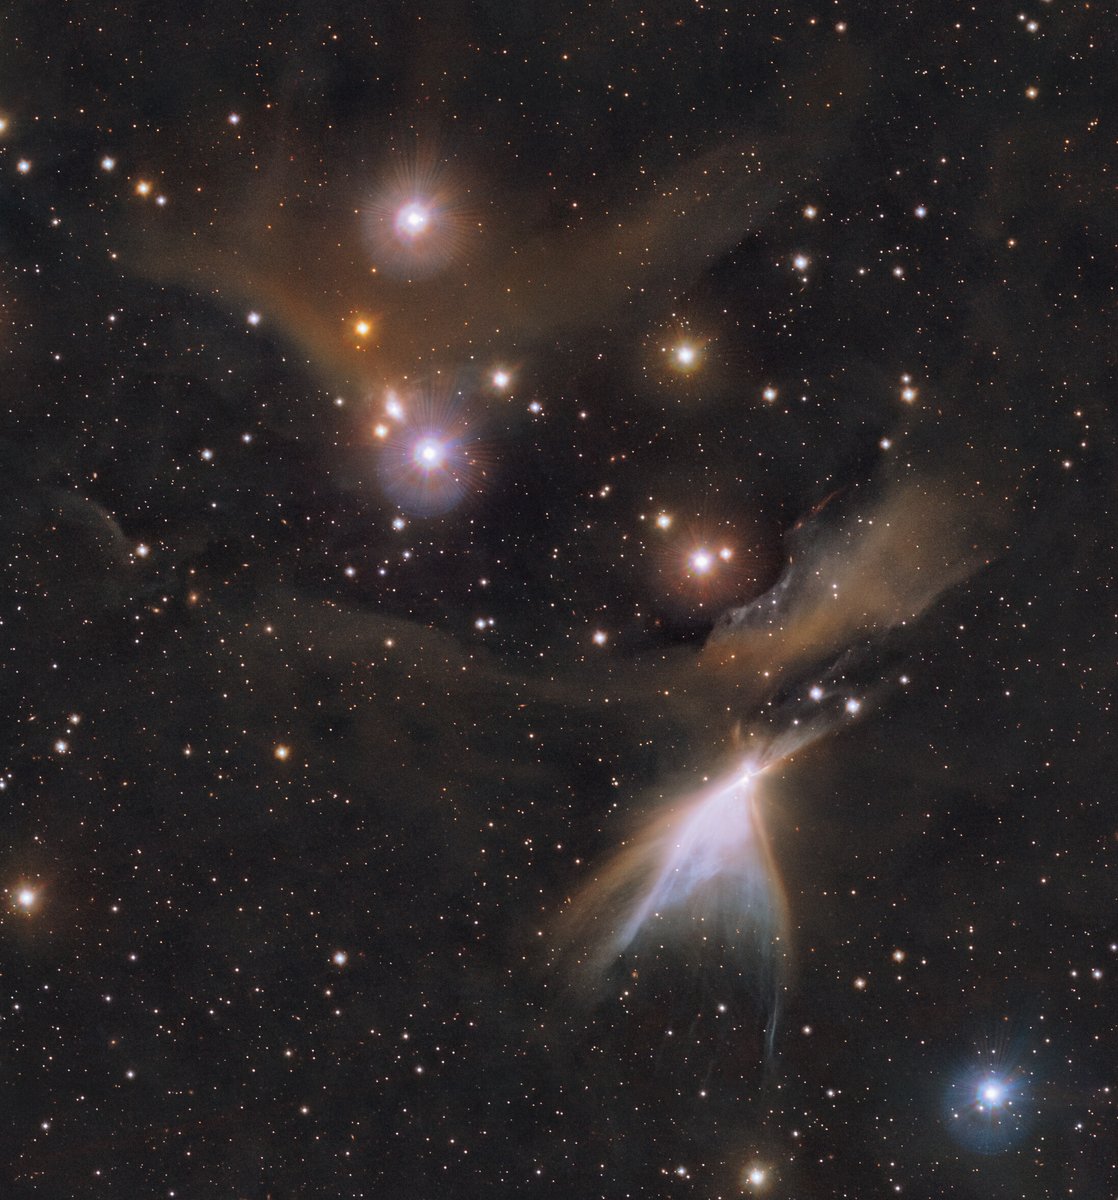 Breathtaking: An infrared view of the HH 909 A object in the Chamaeleon constellation

(Credit: ESO/Meingast et al.)